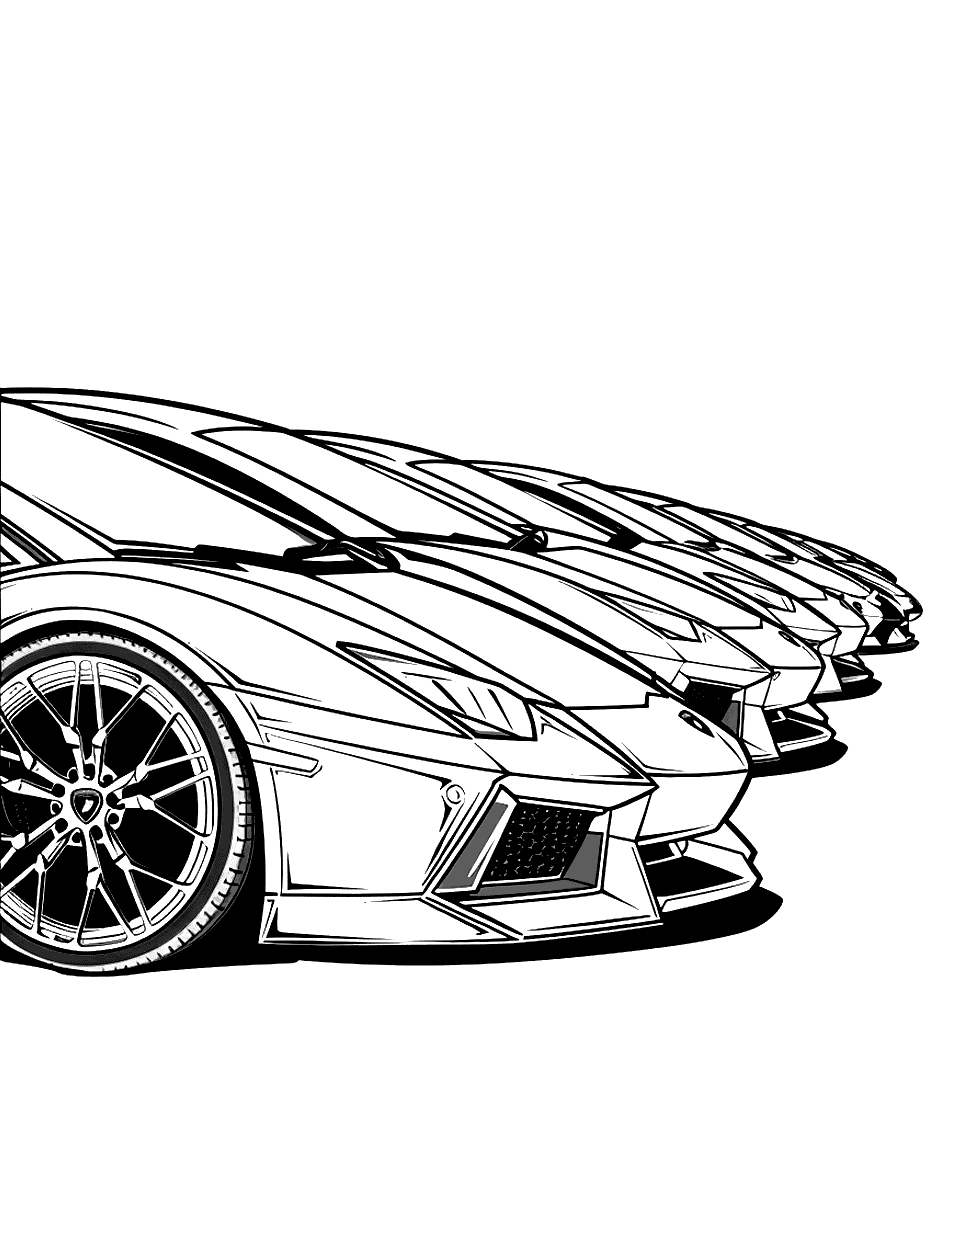 Supercar Showdown Lamborghini Coloring Page - A Lamborghini supercars lined up next to each other ready for a race.